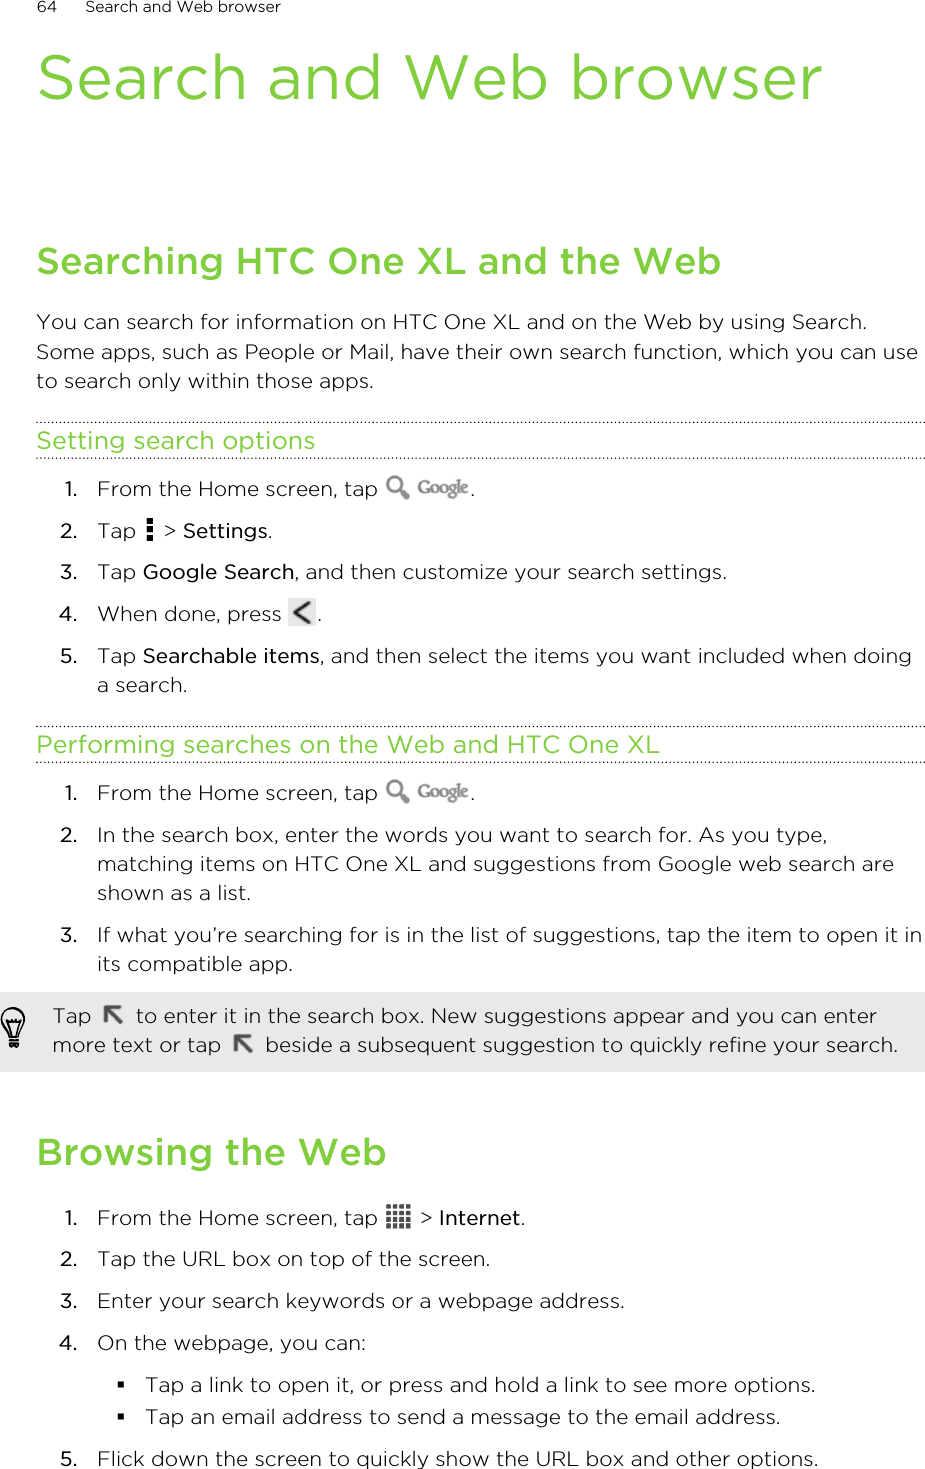 Search and Web browserSearching HTC One XL and the WebYou can search for information on HTC One XL and on the Web by using Search.Some apps, such as People or Mail, have their own search function, which you can useto search only within those apps.Setting search options1. From the Home screen, tap  .2. Tap   &gt; Settings.3. Tap Google Search, and then customize your search settings.4. When done, press  .5. Tap Searchable items, and then select the items you want included when doinga search.Performing searches on the Web and HTC One XL1. From the Home screen, tap  .2. In the search box, enter the words you want to search for. As you type,matching items on HTC One XL and suggestions from Google web search areshown as a list.3. If what you’re searching for is in the list of suggestions, tap the item to open it inits compatible app. Tap   to enter it in the search box. New suggestions appear and you can entermore text or tap   beside a subsequent suggestion to quickly refine your search.Browsing the Web1. From the Home screen, tap   &gt; Internet.2. Tap the URL box on top of the screen.3. Enter your search keywords or a webpage address.4. On the webpage, you can:§Tap a link to open it, or press and hold a link to see more options.§Tap an email address to send a message to the email address.5. Flick down the screen to quickly show the URL box and other options.64 Search and Web browser